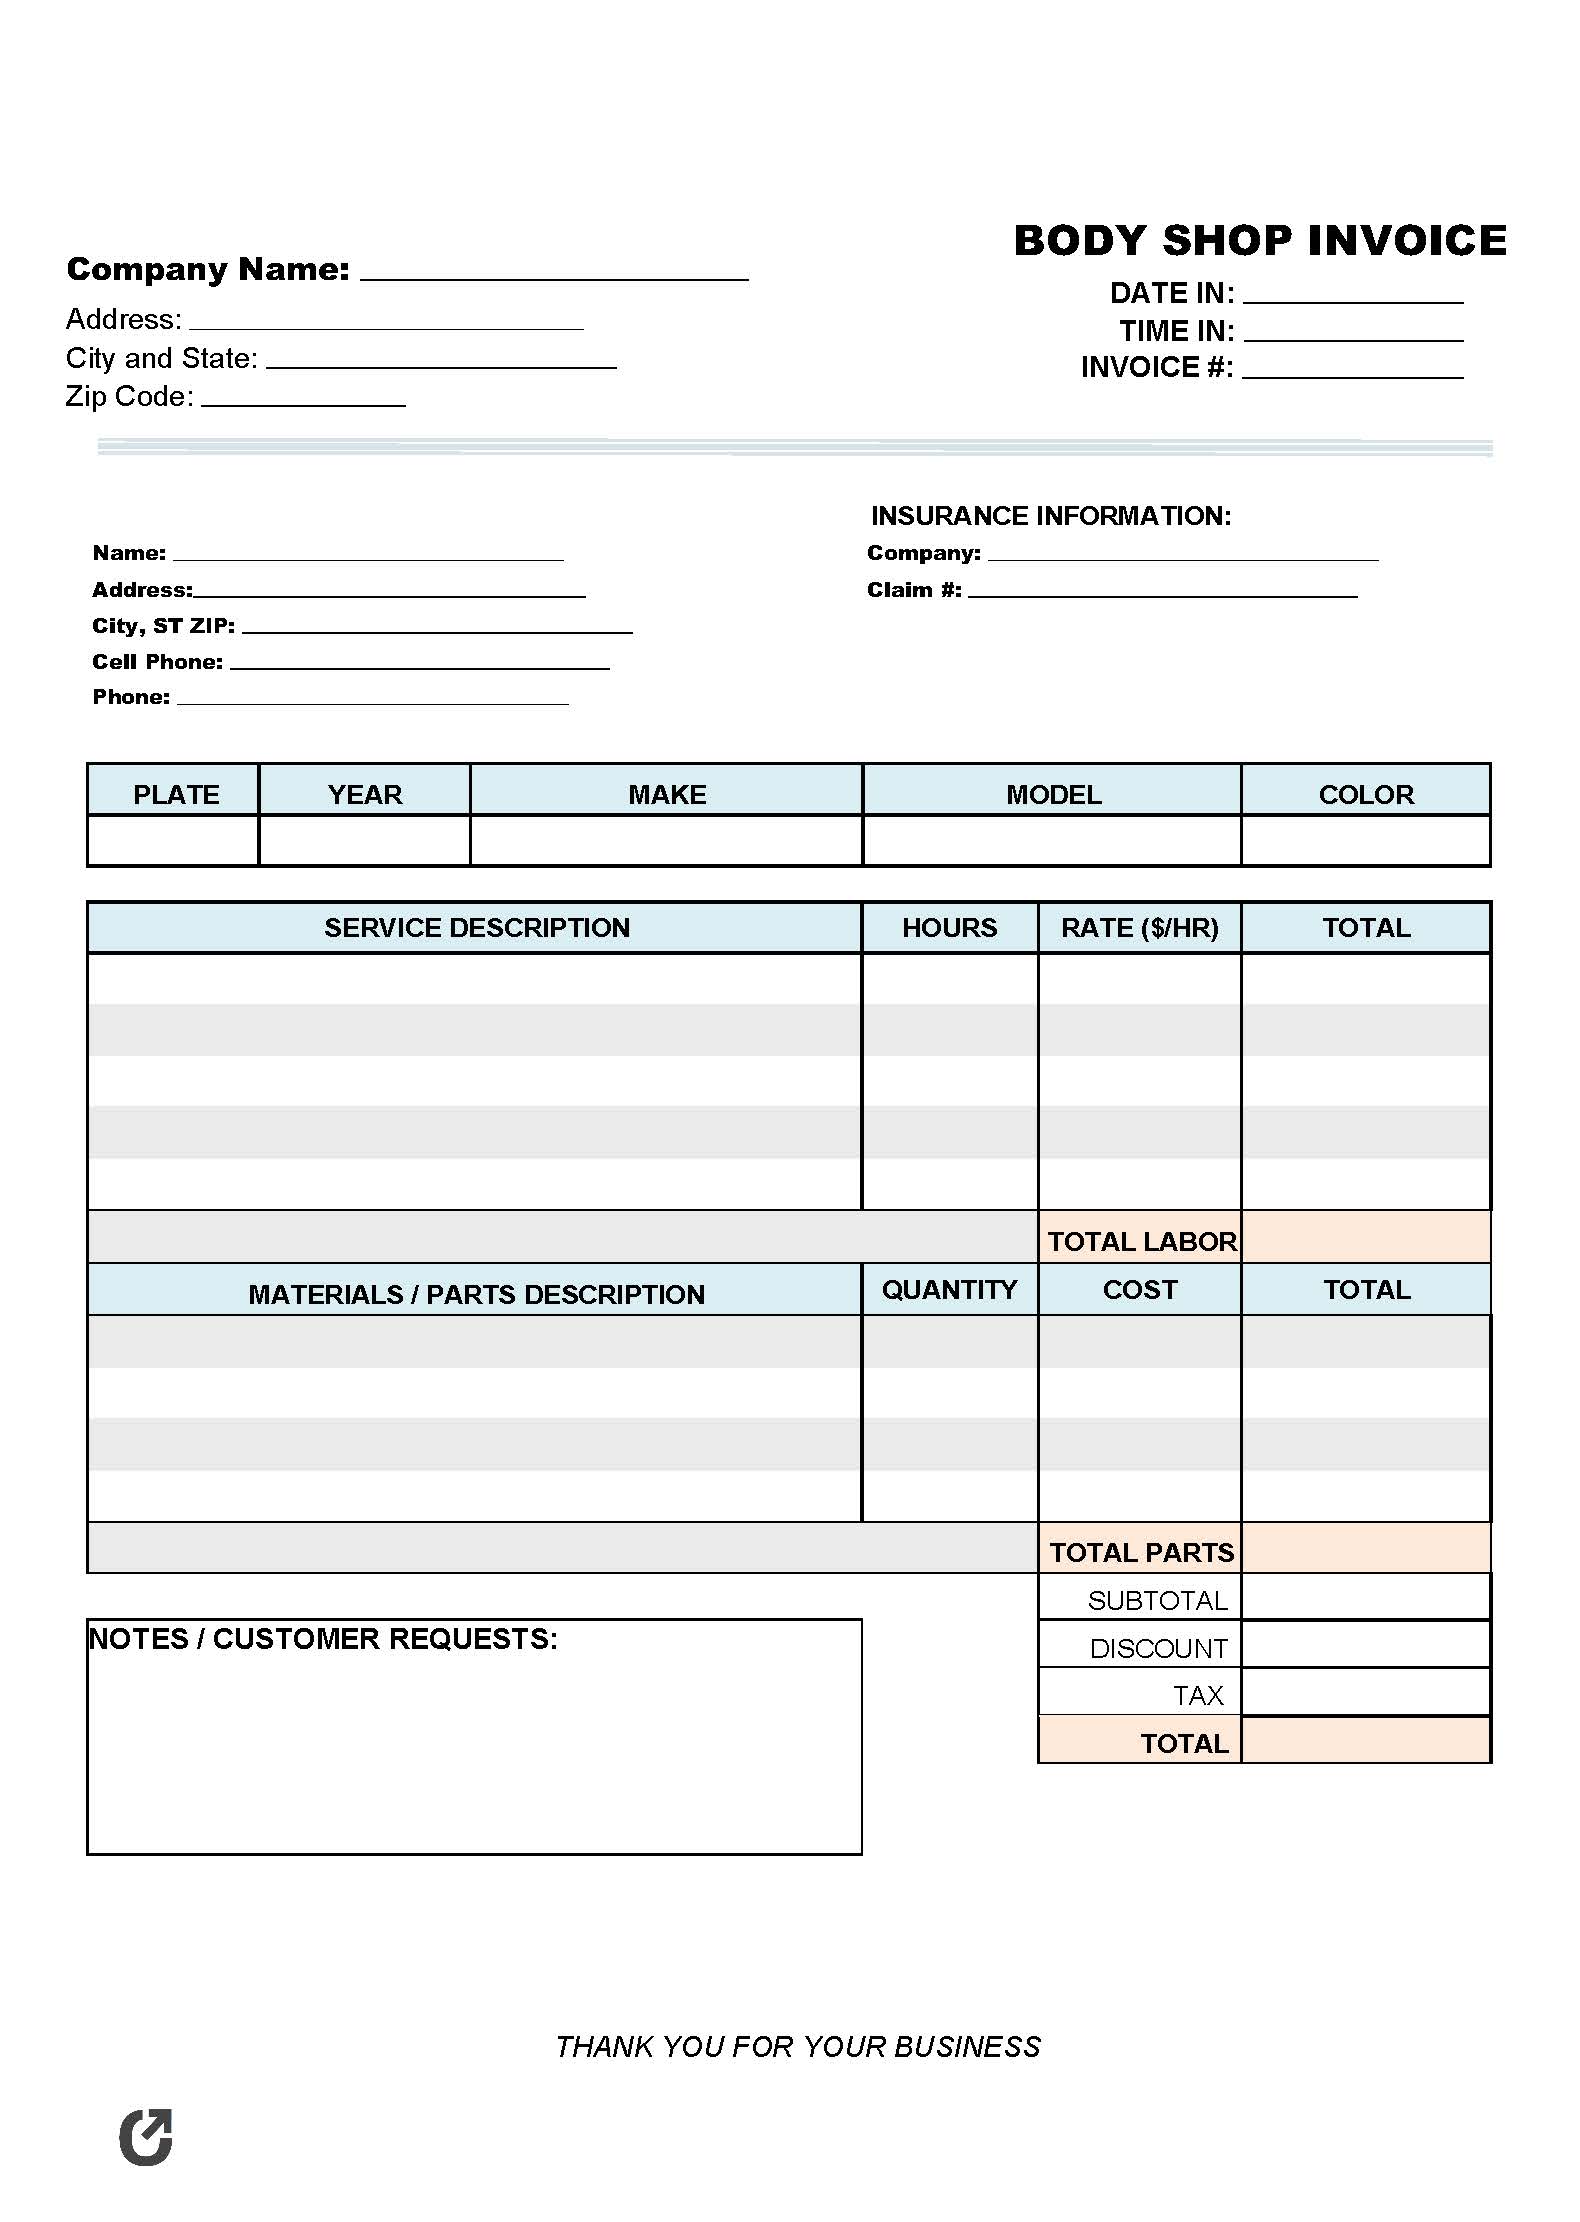 Free Body Shop Invoice Template  PDF  WORD  EXCEL Pertaining To Car Sales Invoice Template Uk